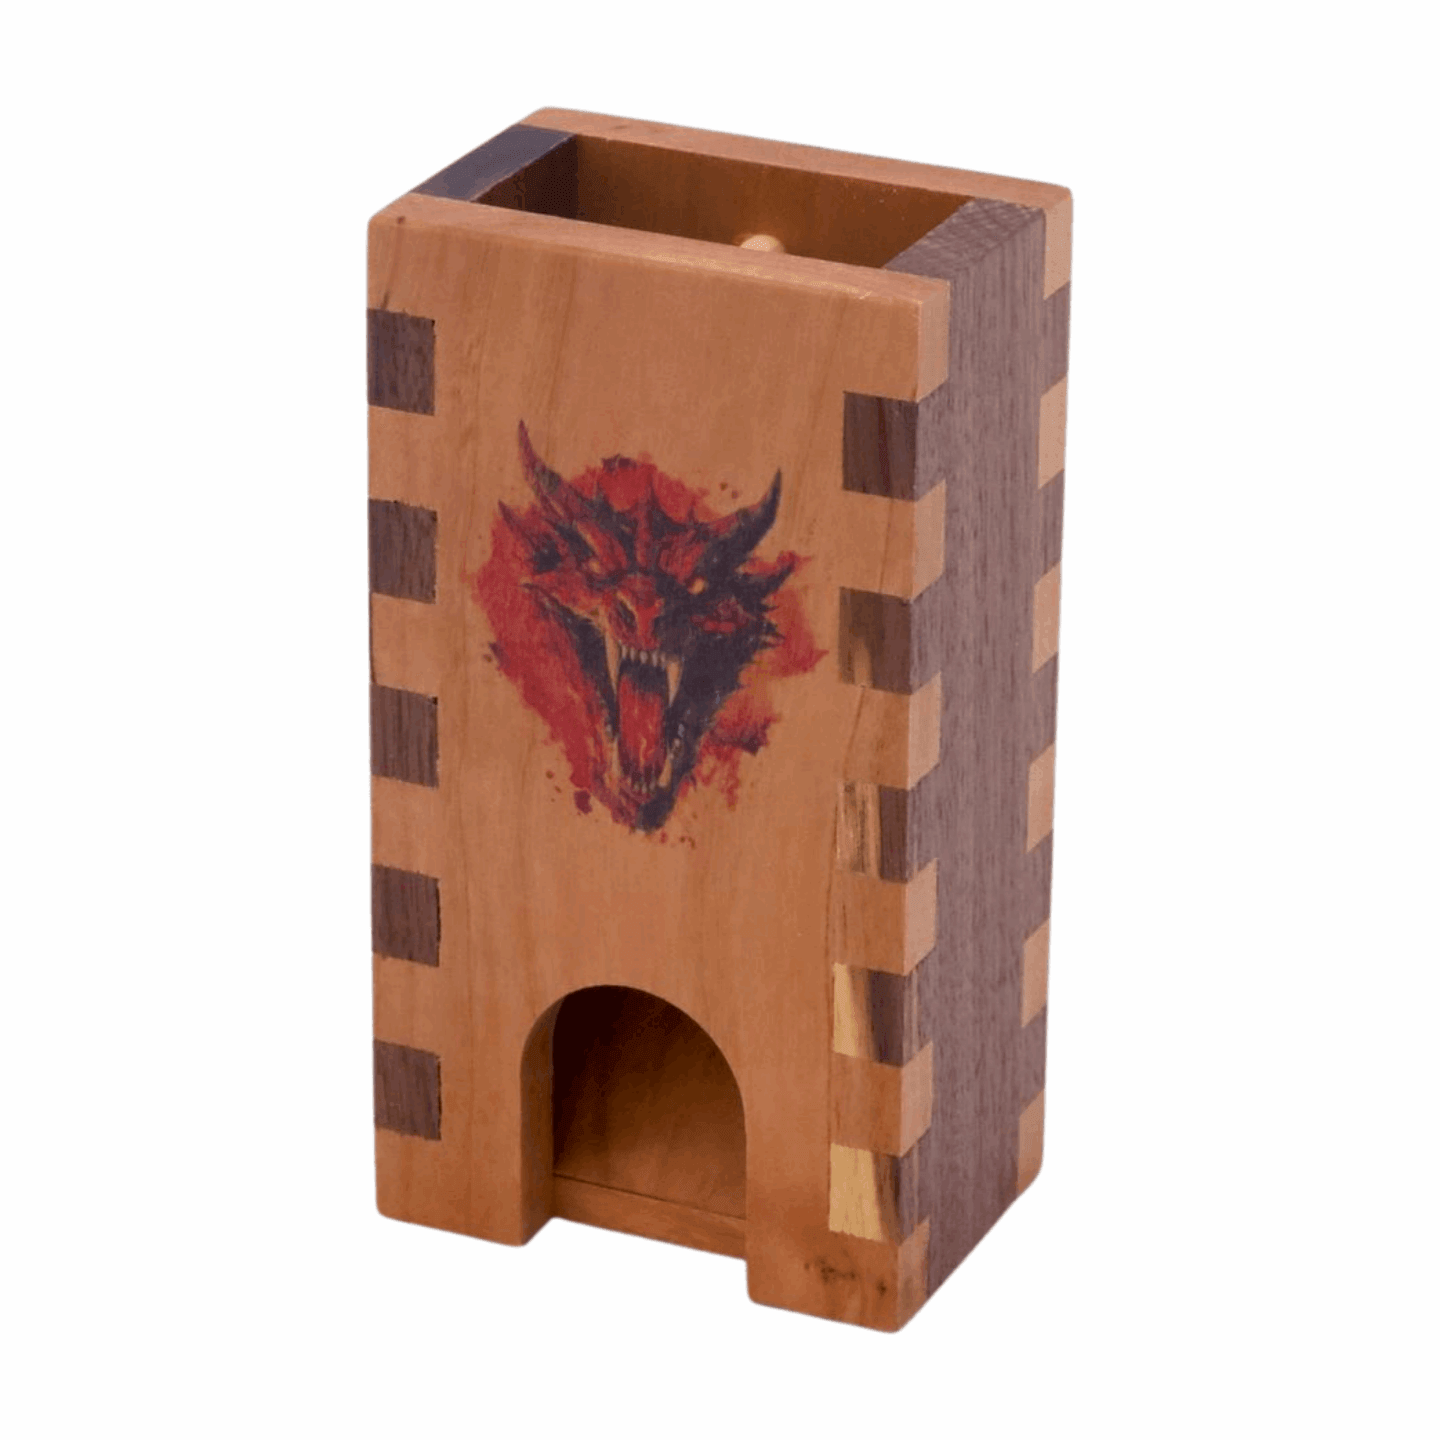 Red Dragon Dice Tower Wood for Role Playing Games, Dungeons and Dragons 5e, Shadowrun, Pathfinder 2e, DnD Dice Roller Wooden, Gamer Dad Gift - Dragon Armor Games